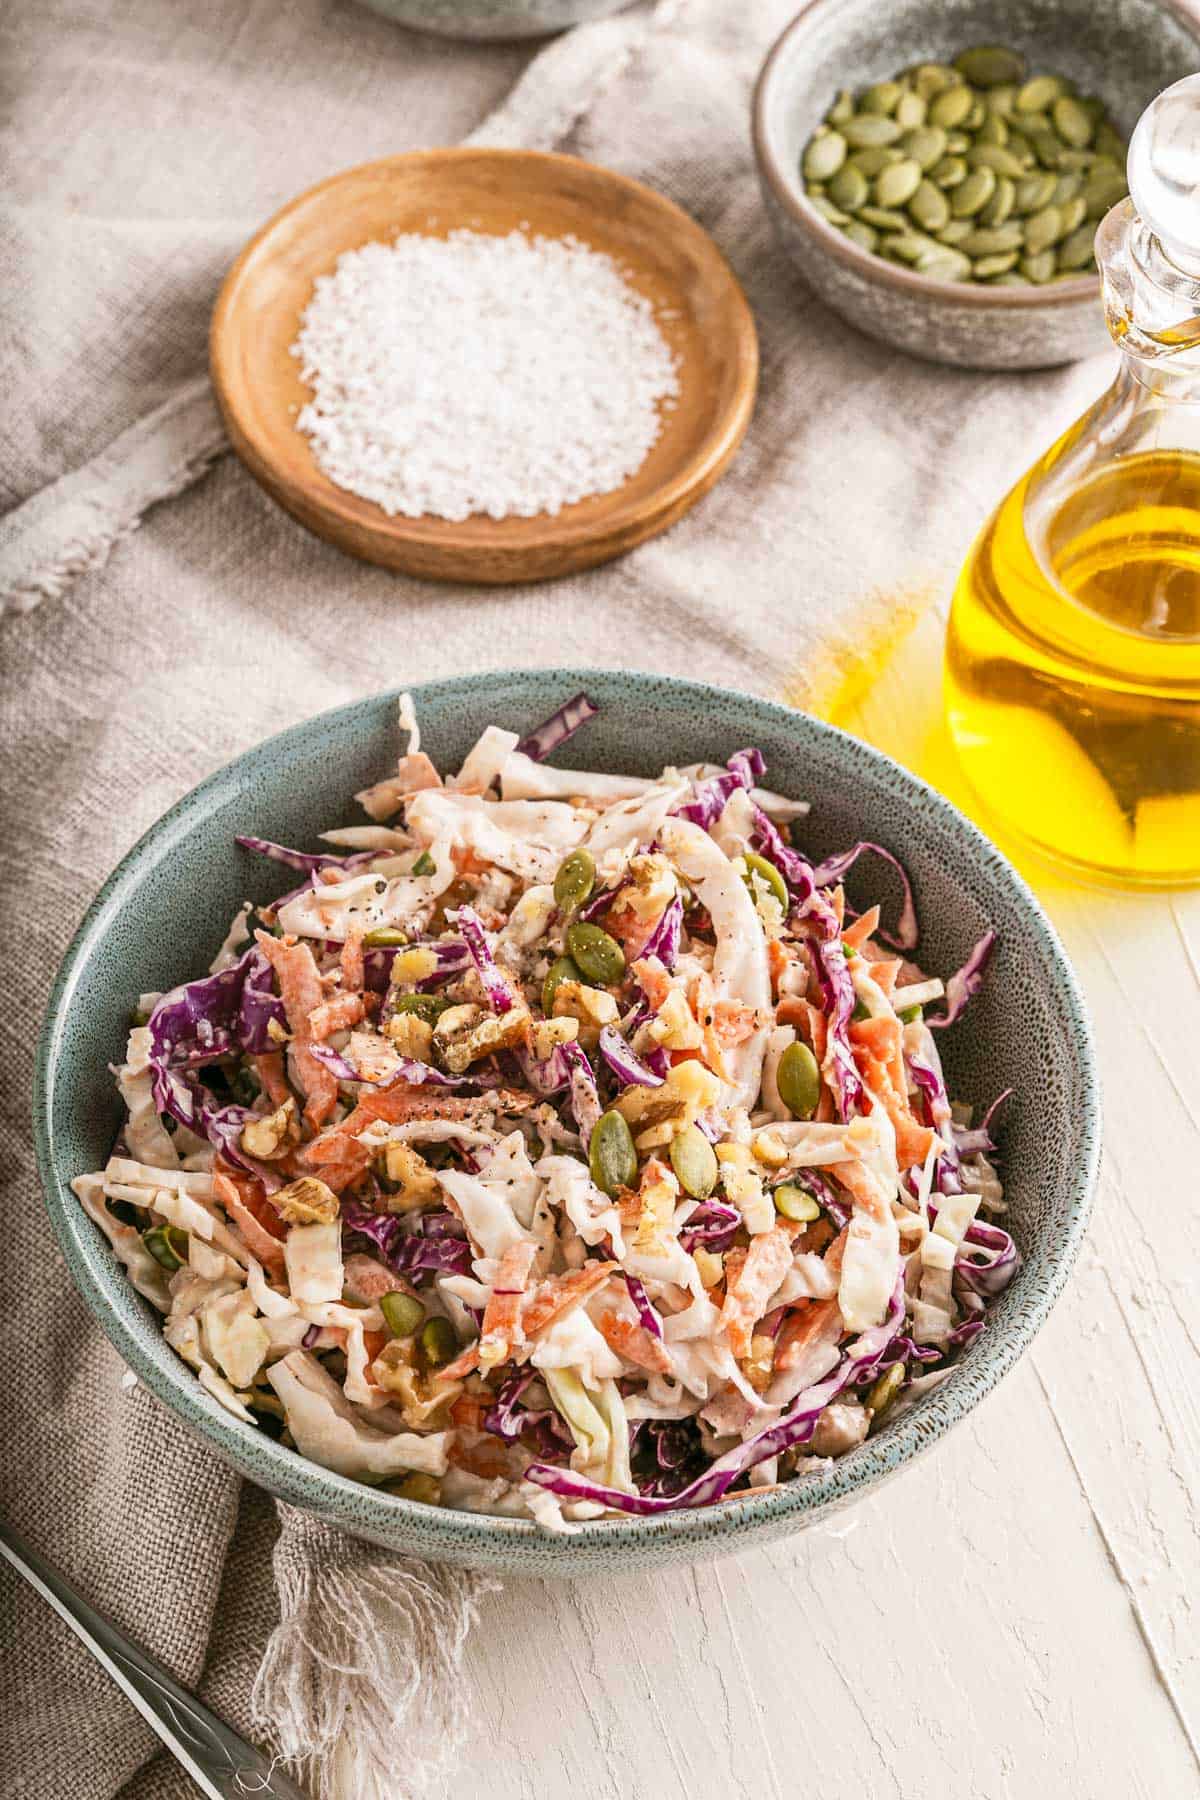 Bowl of crunchy coleslaw on a table surrounded by ingredients.